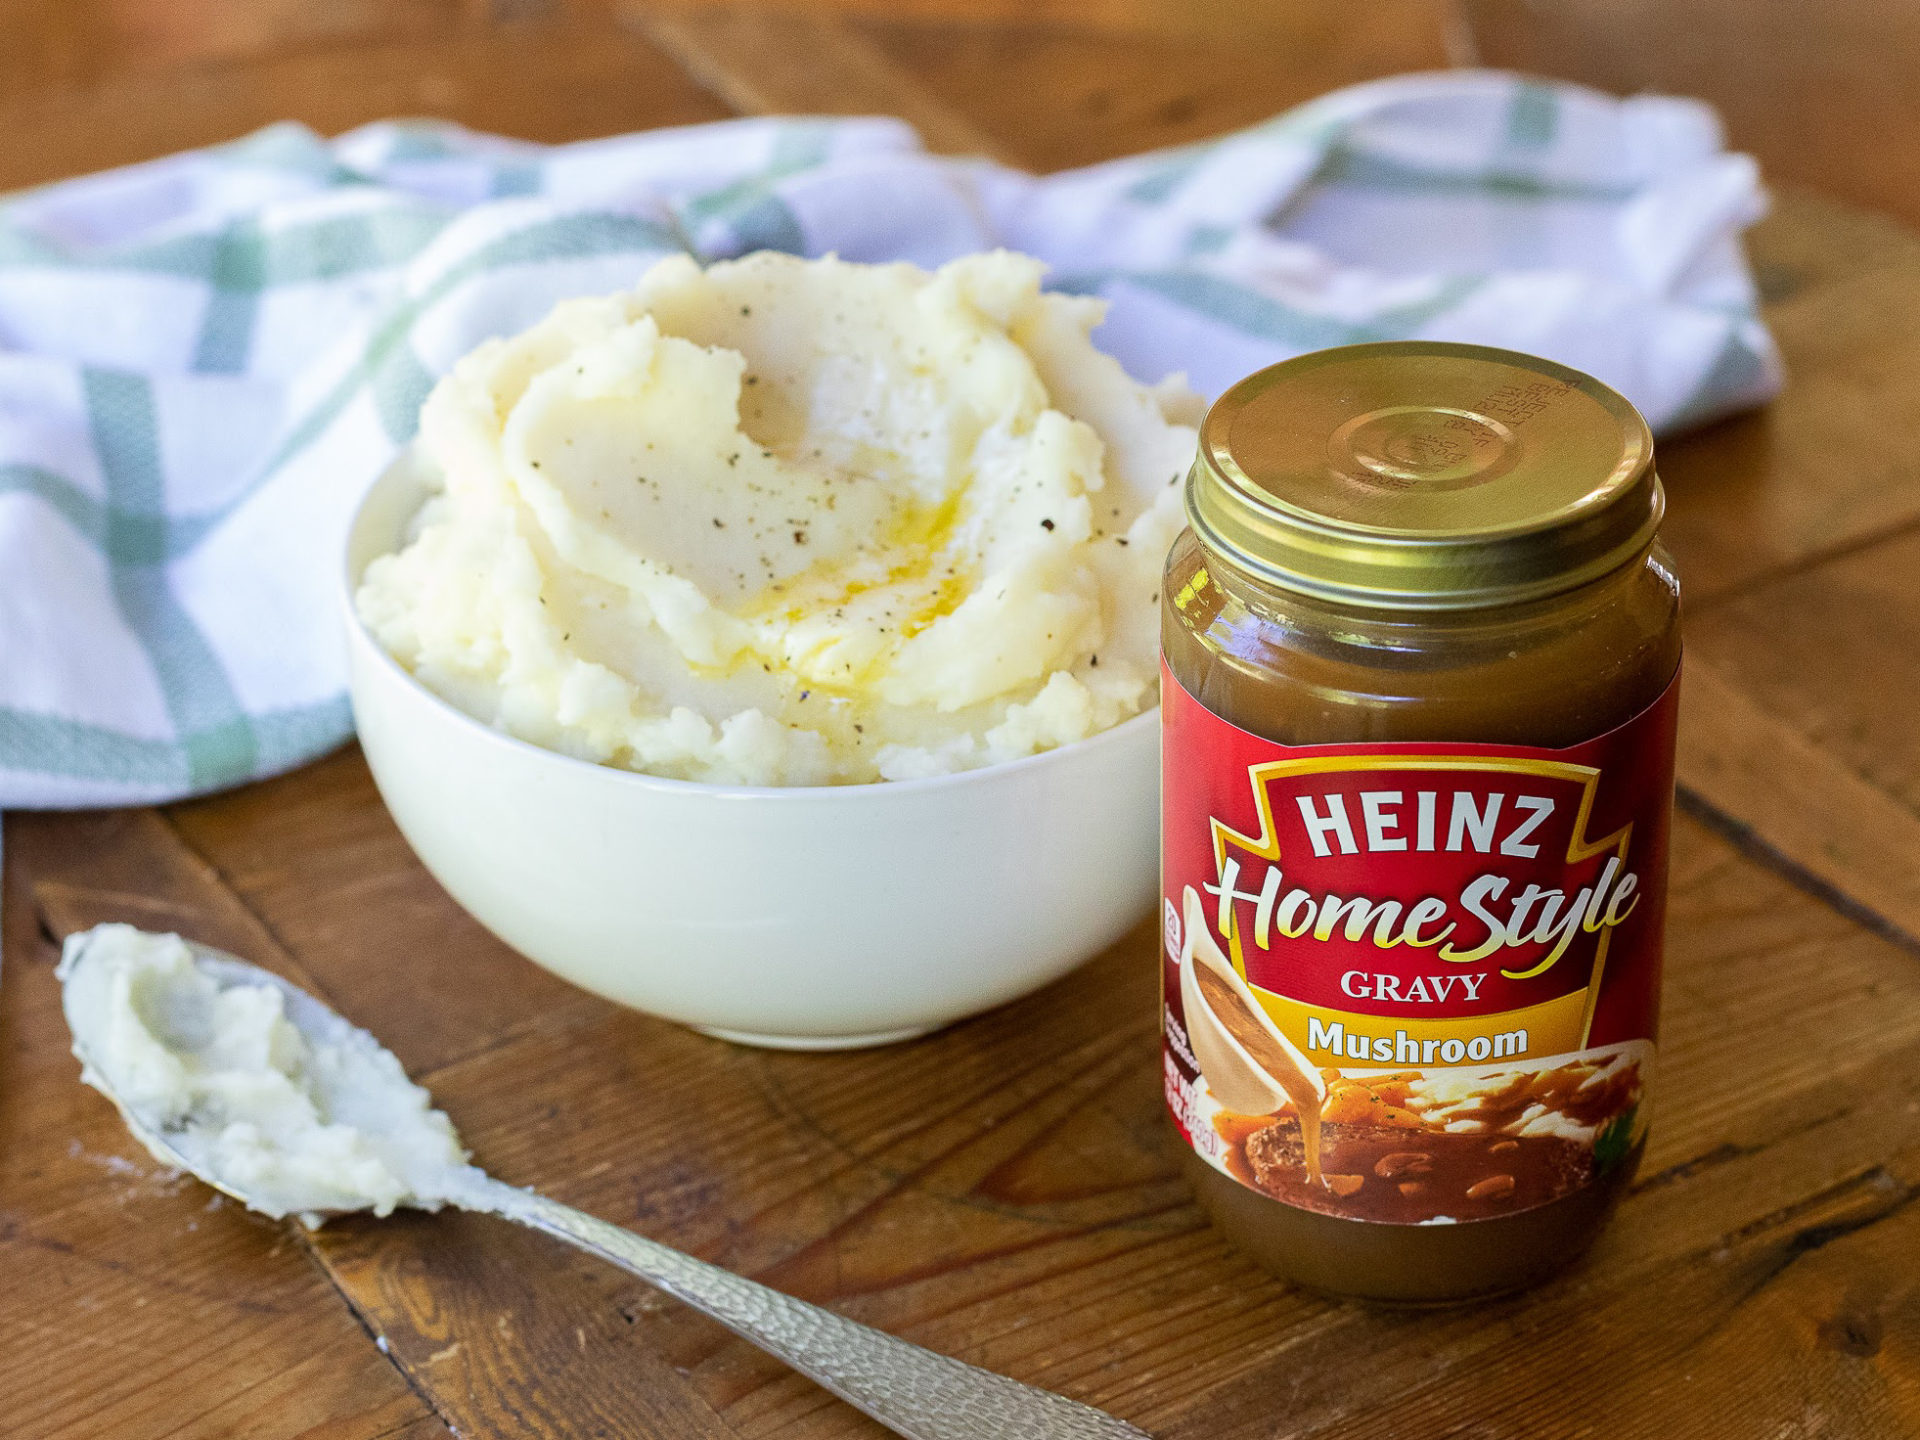 Grab The Jars Of Heinz Home Style Gravy For Just $1.50 At Kroger